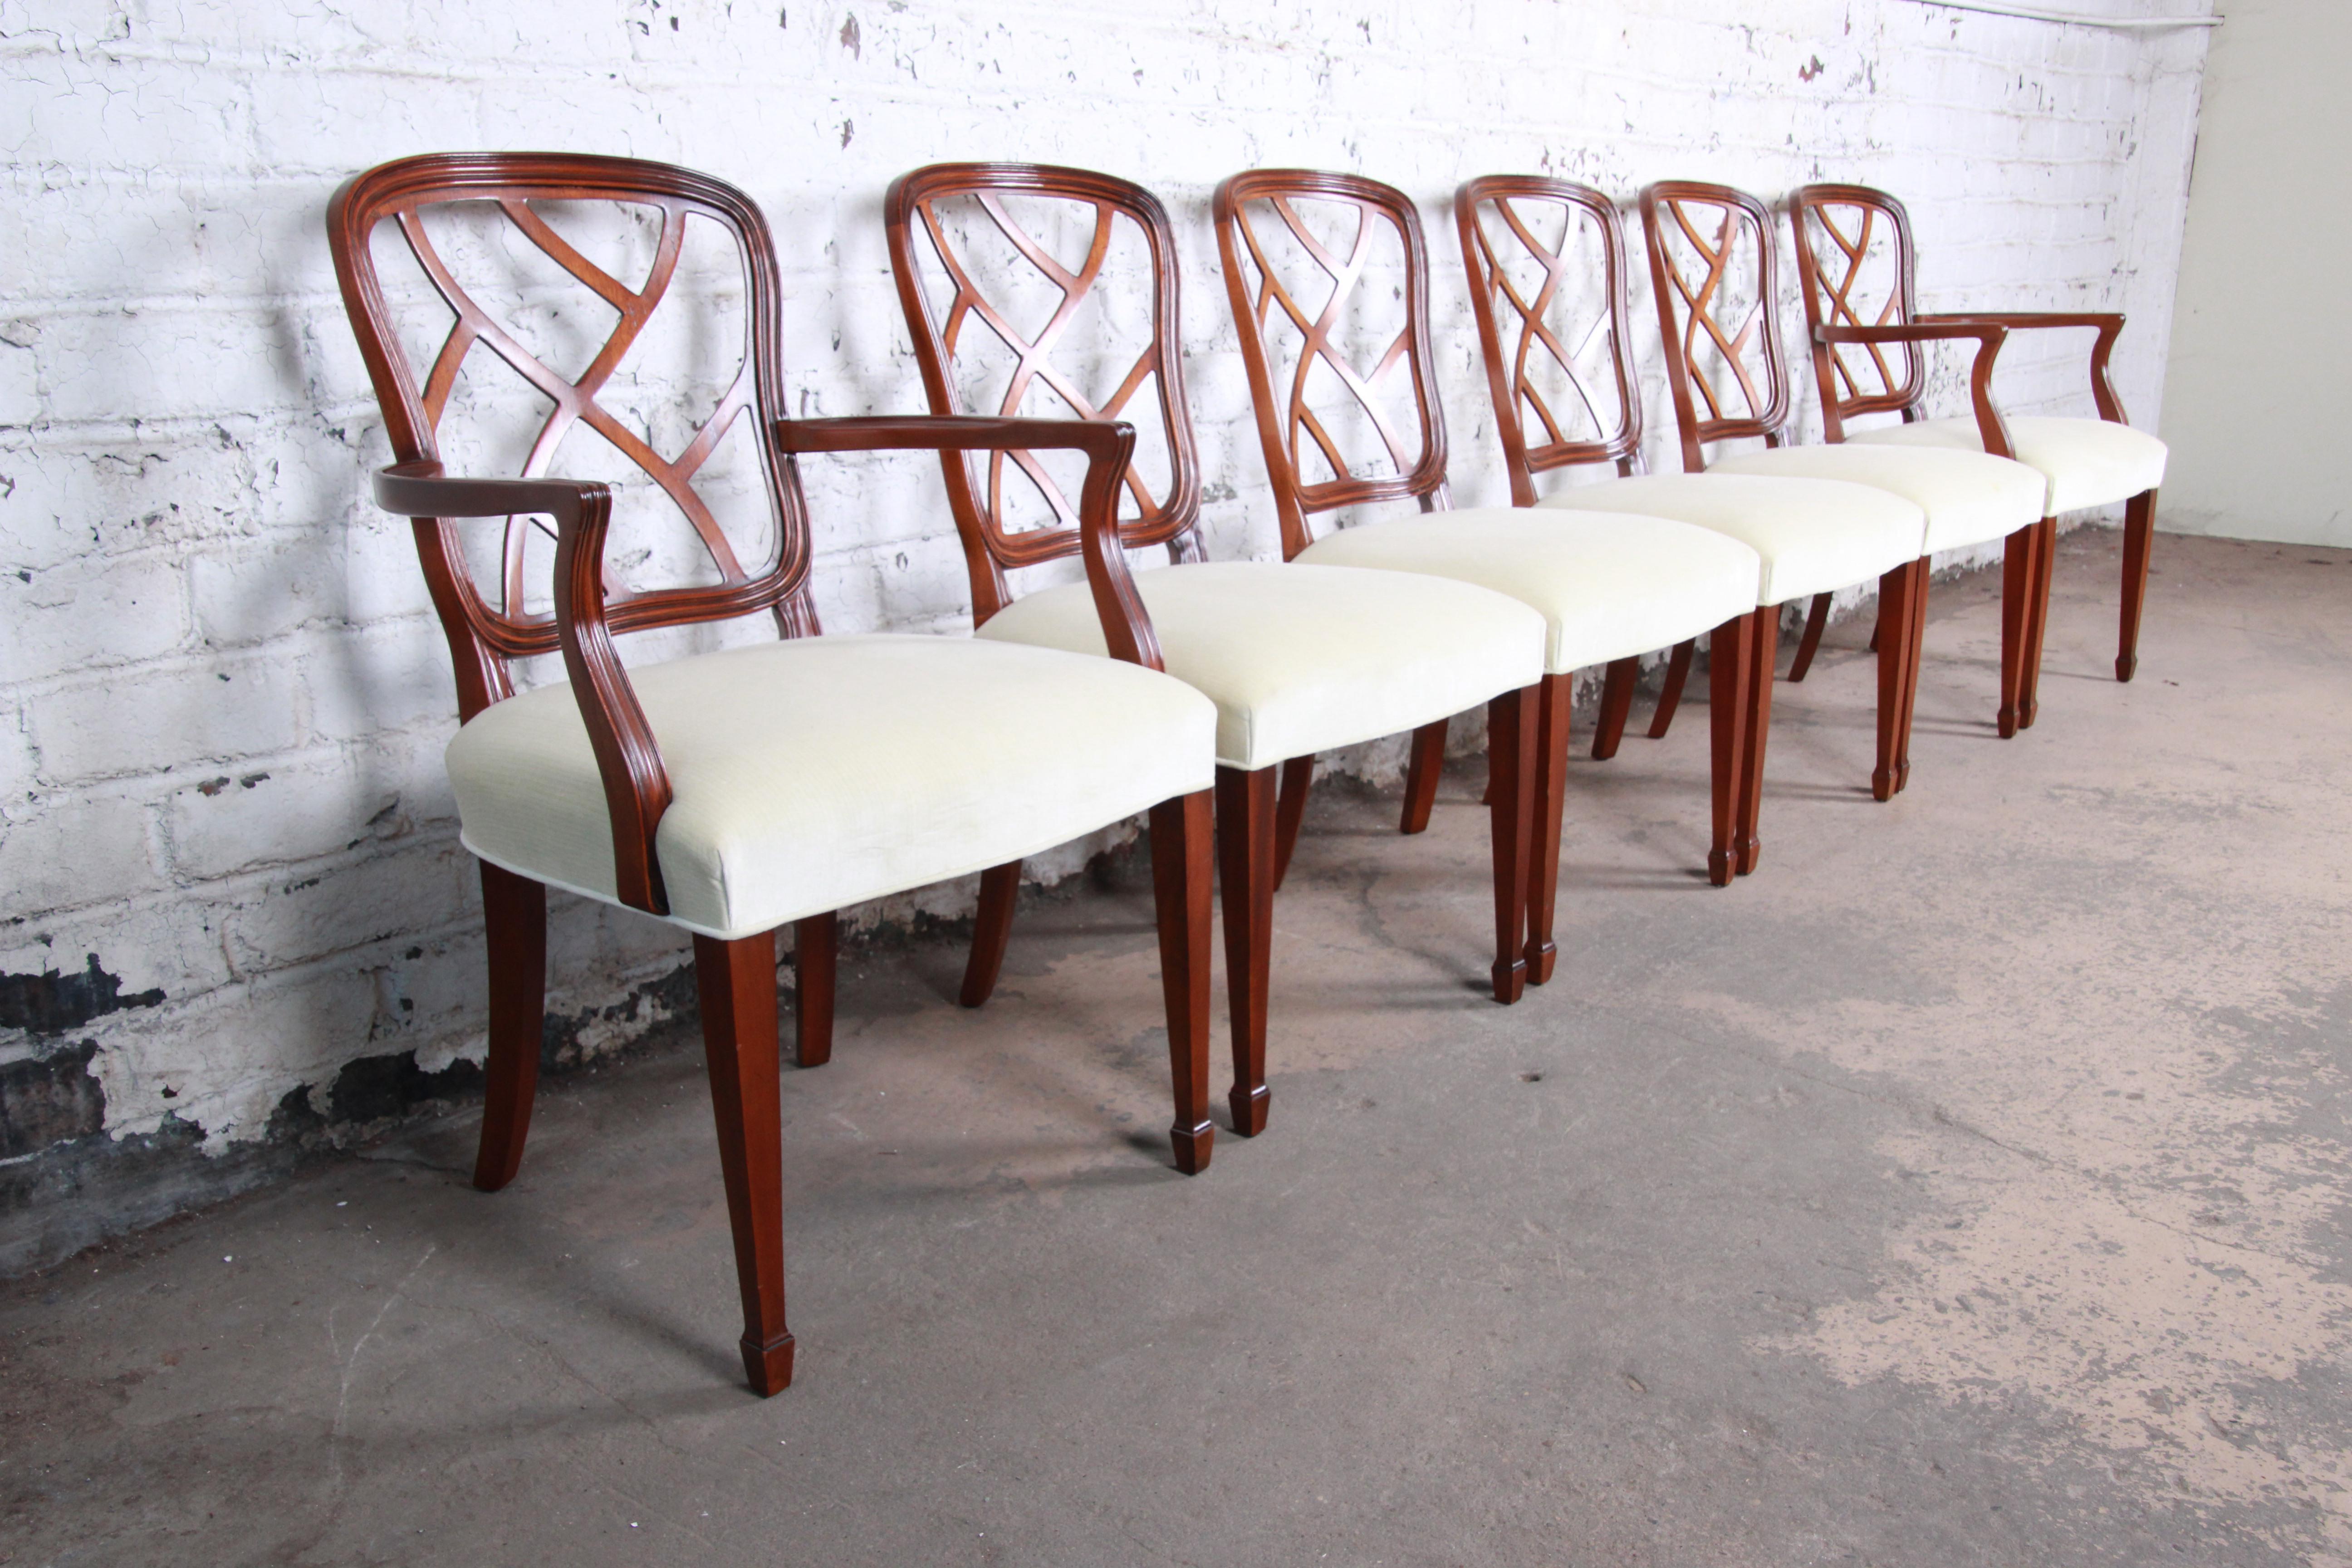 An exceptional set of carved mahogany formal dining chairs by Kindel Furniture of Grand Rapids. The set includes two captain armchairs and four side chairs. The chairs feature solid mahogany frames with unique carved seat backs. The ivory velvet